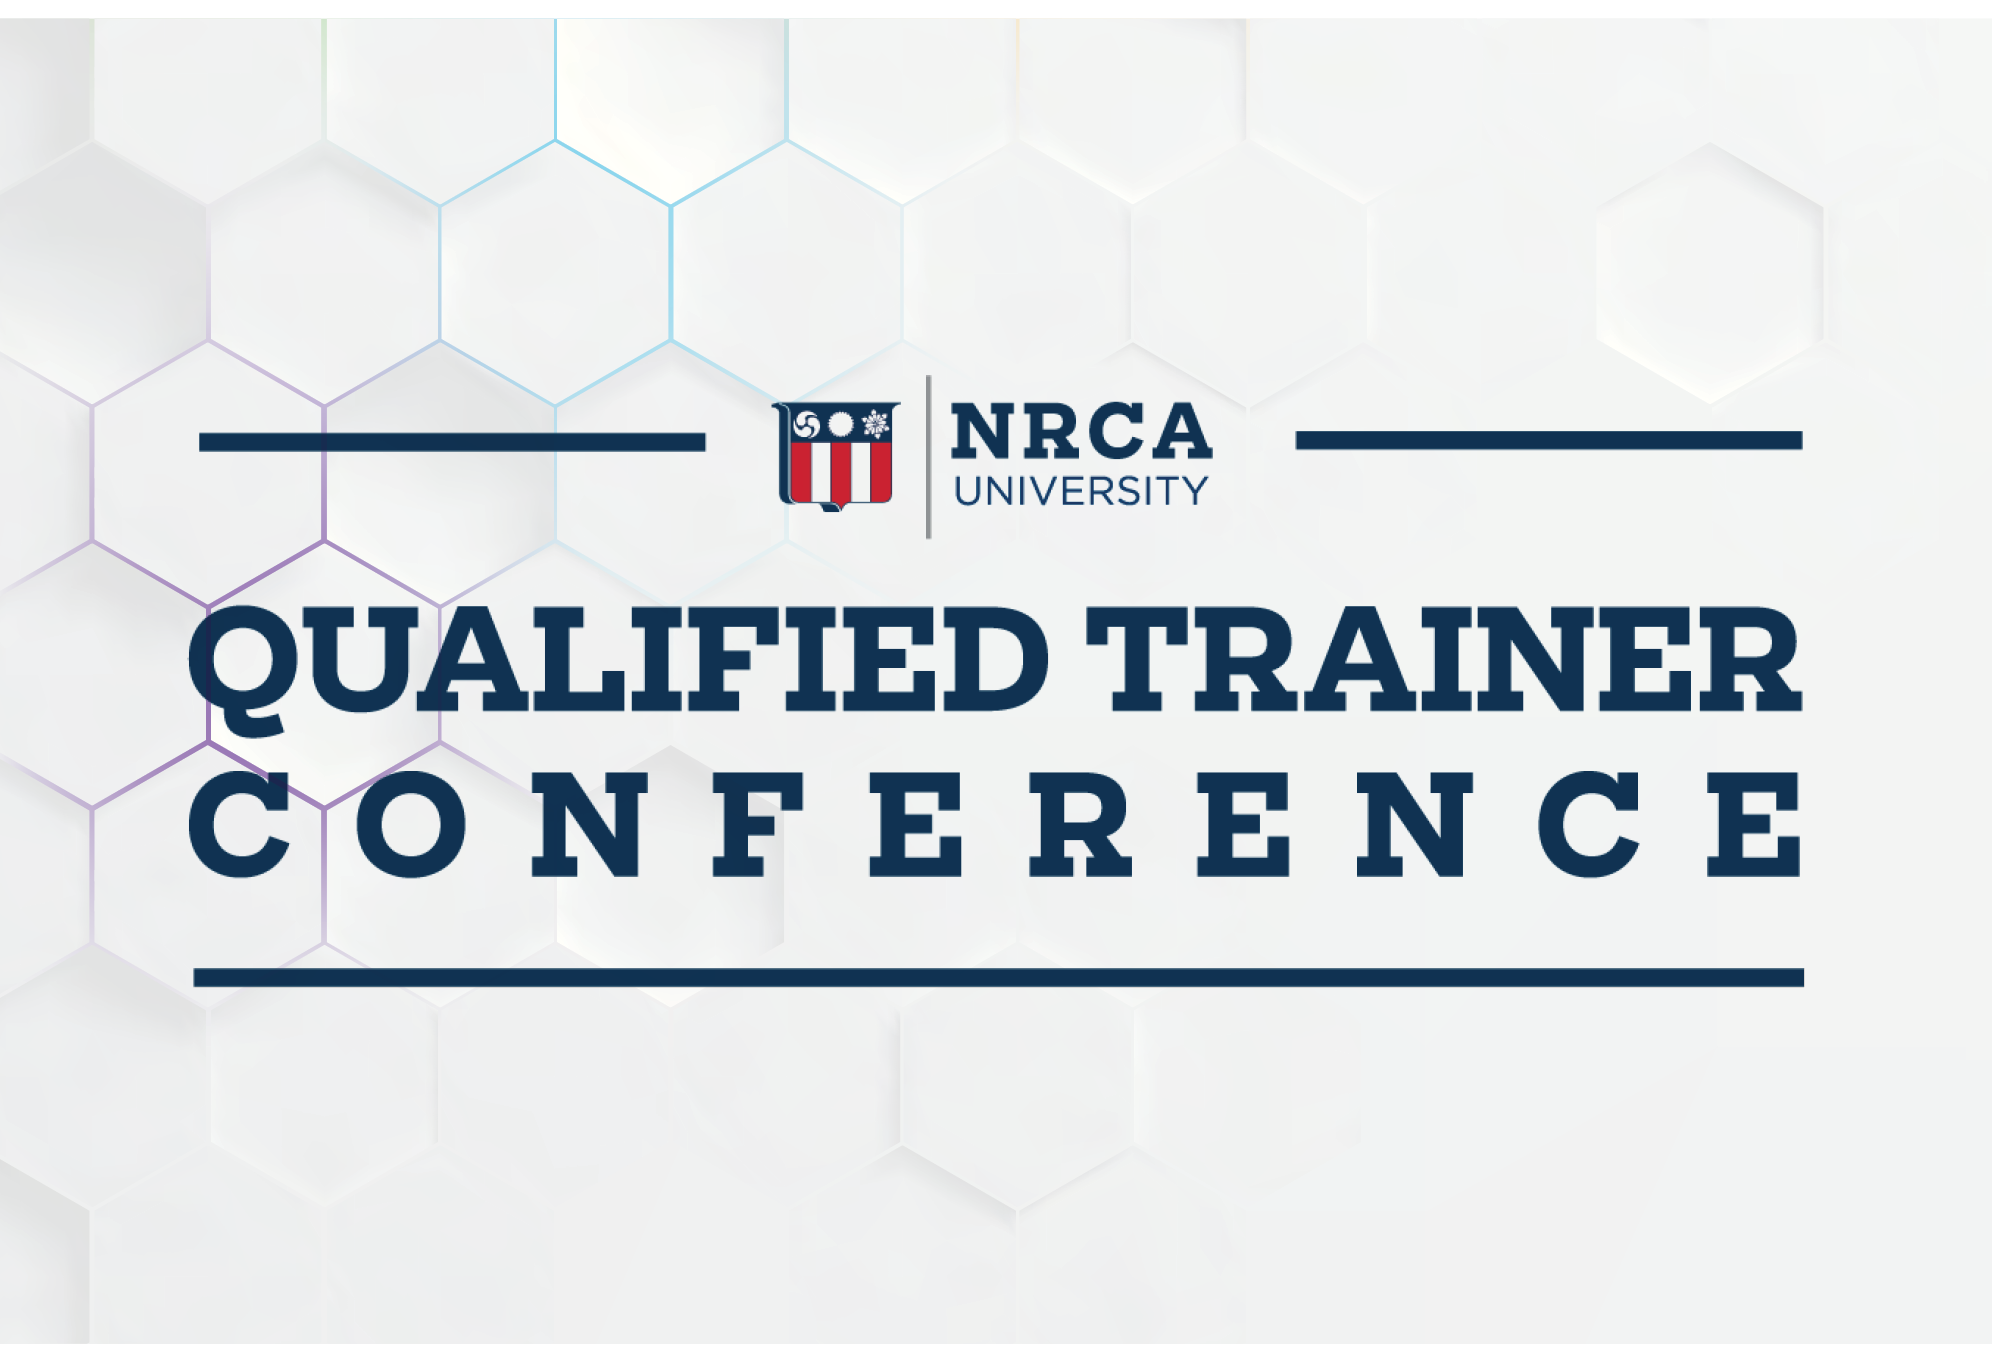 Qualified Trainer Conferences NRCA